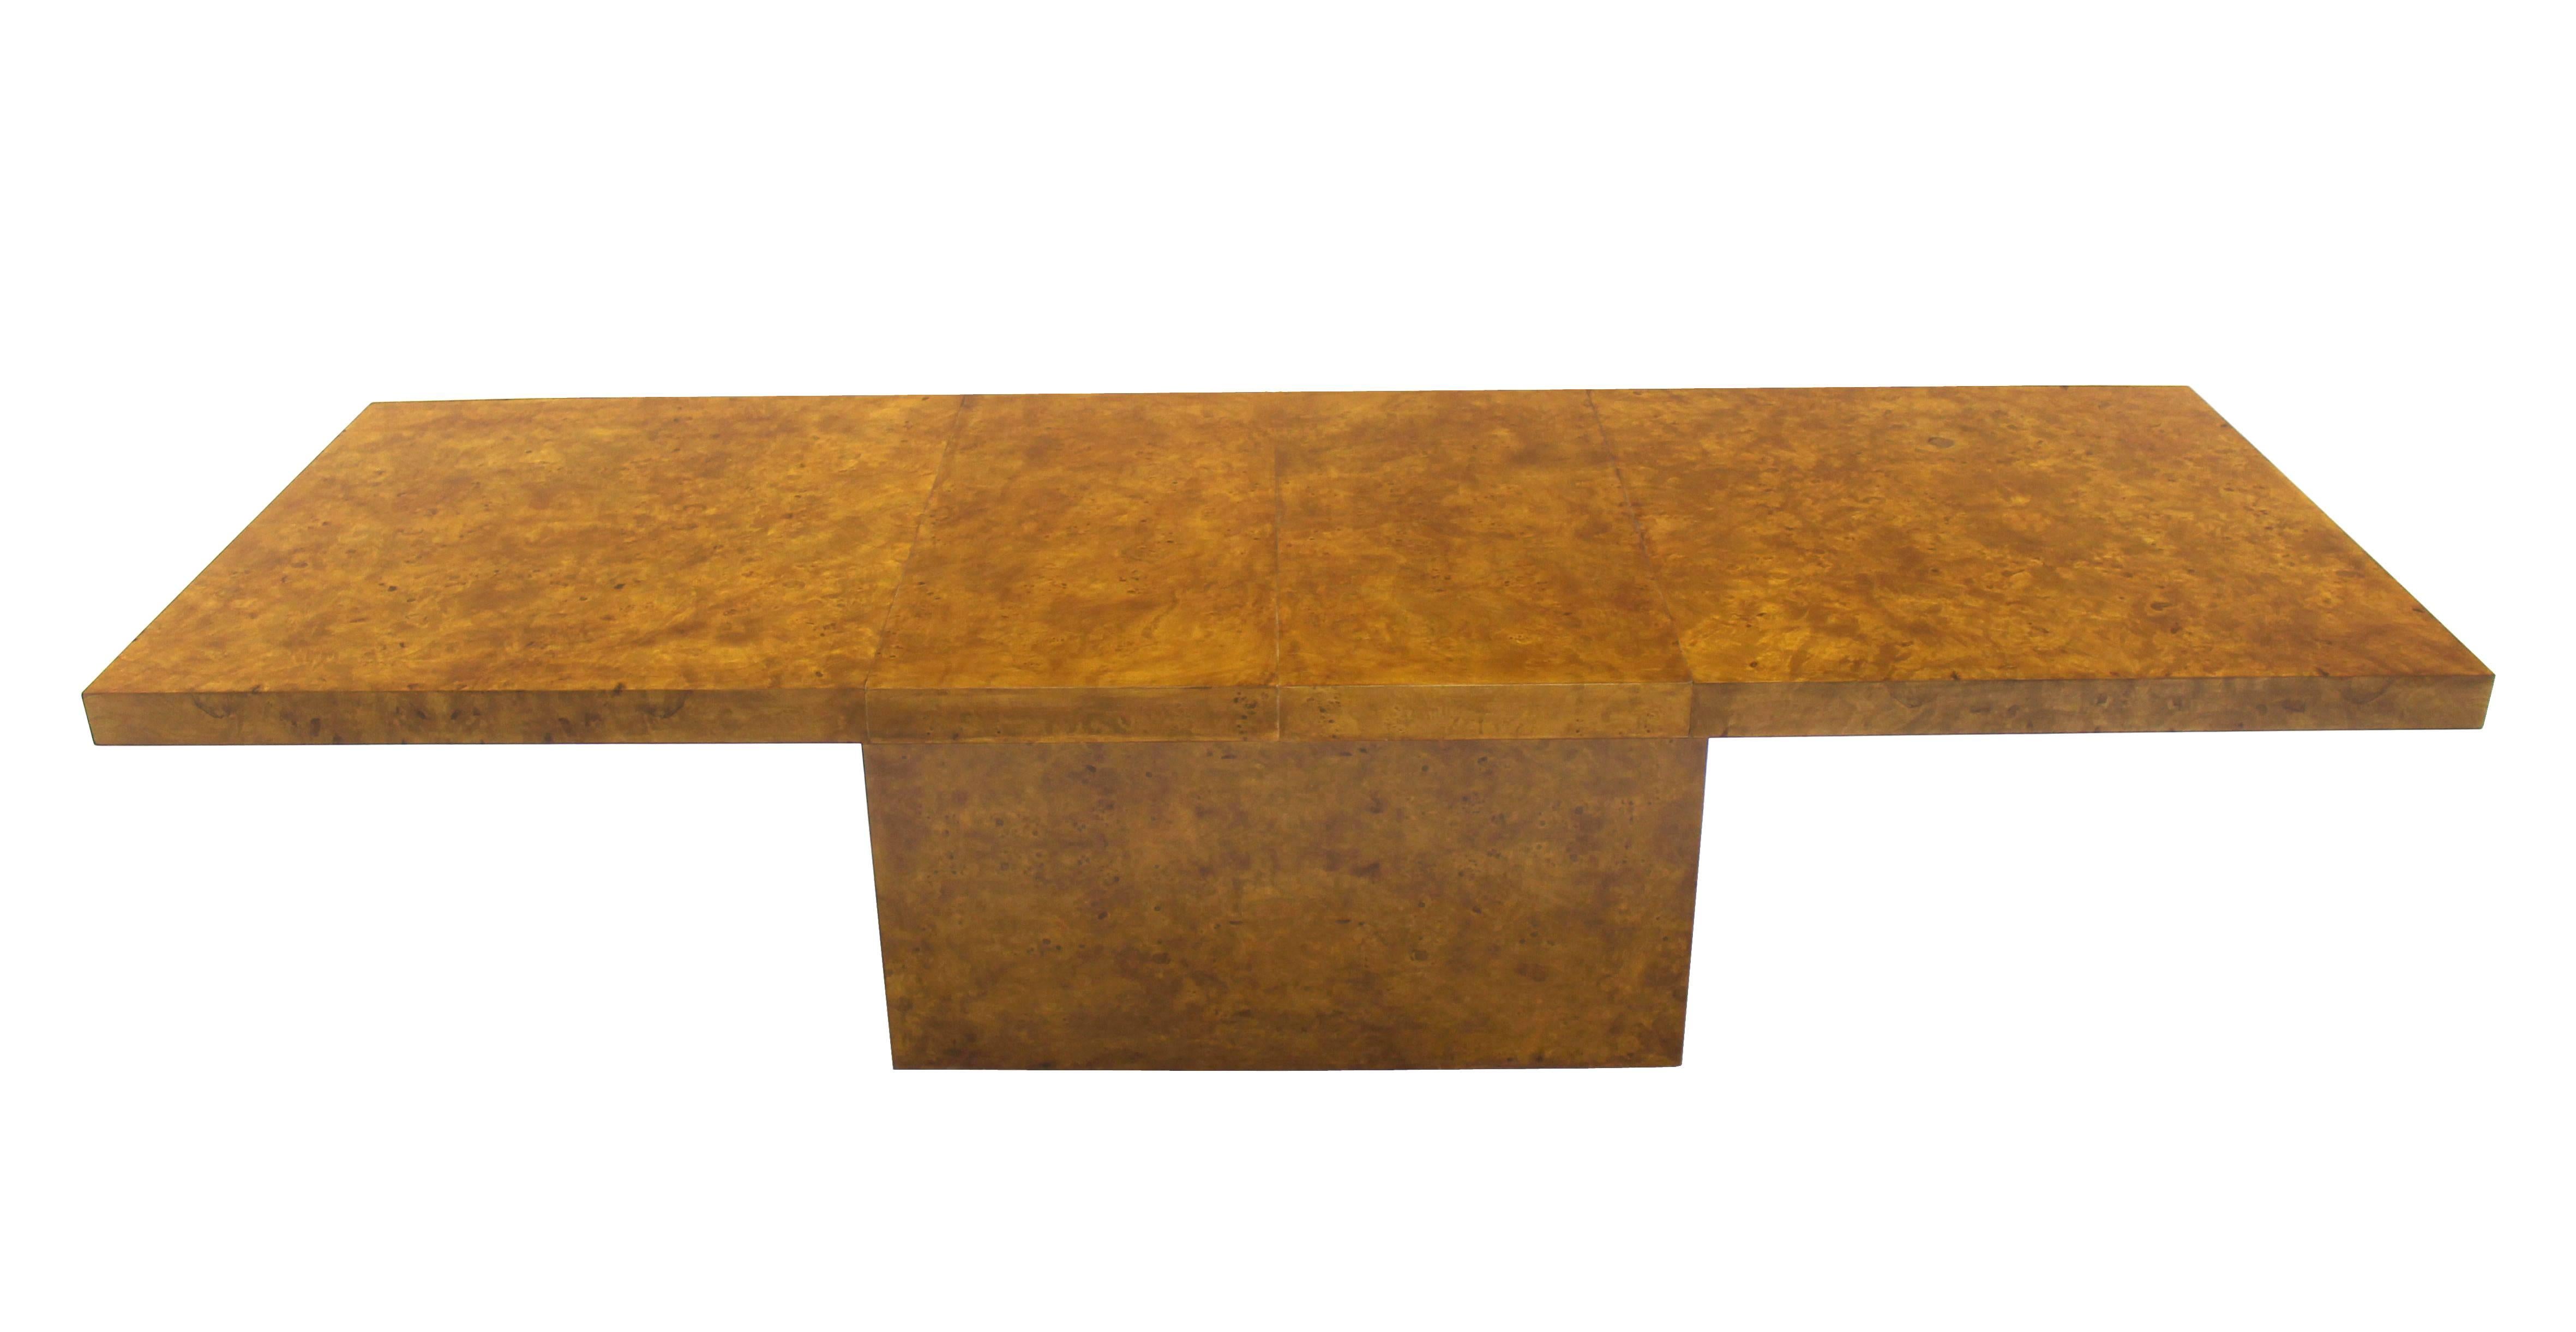 Very nice Mid-Century modern burl wood dining table with 2 x 18